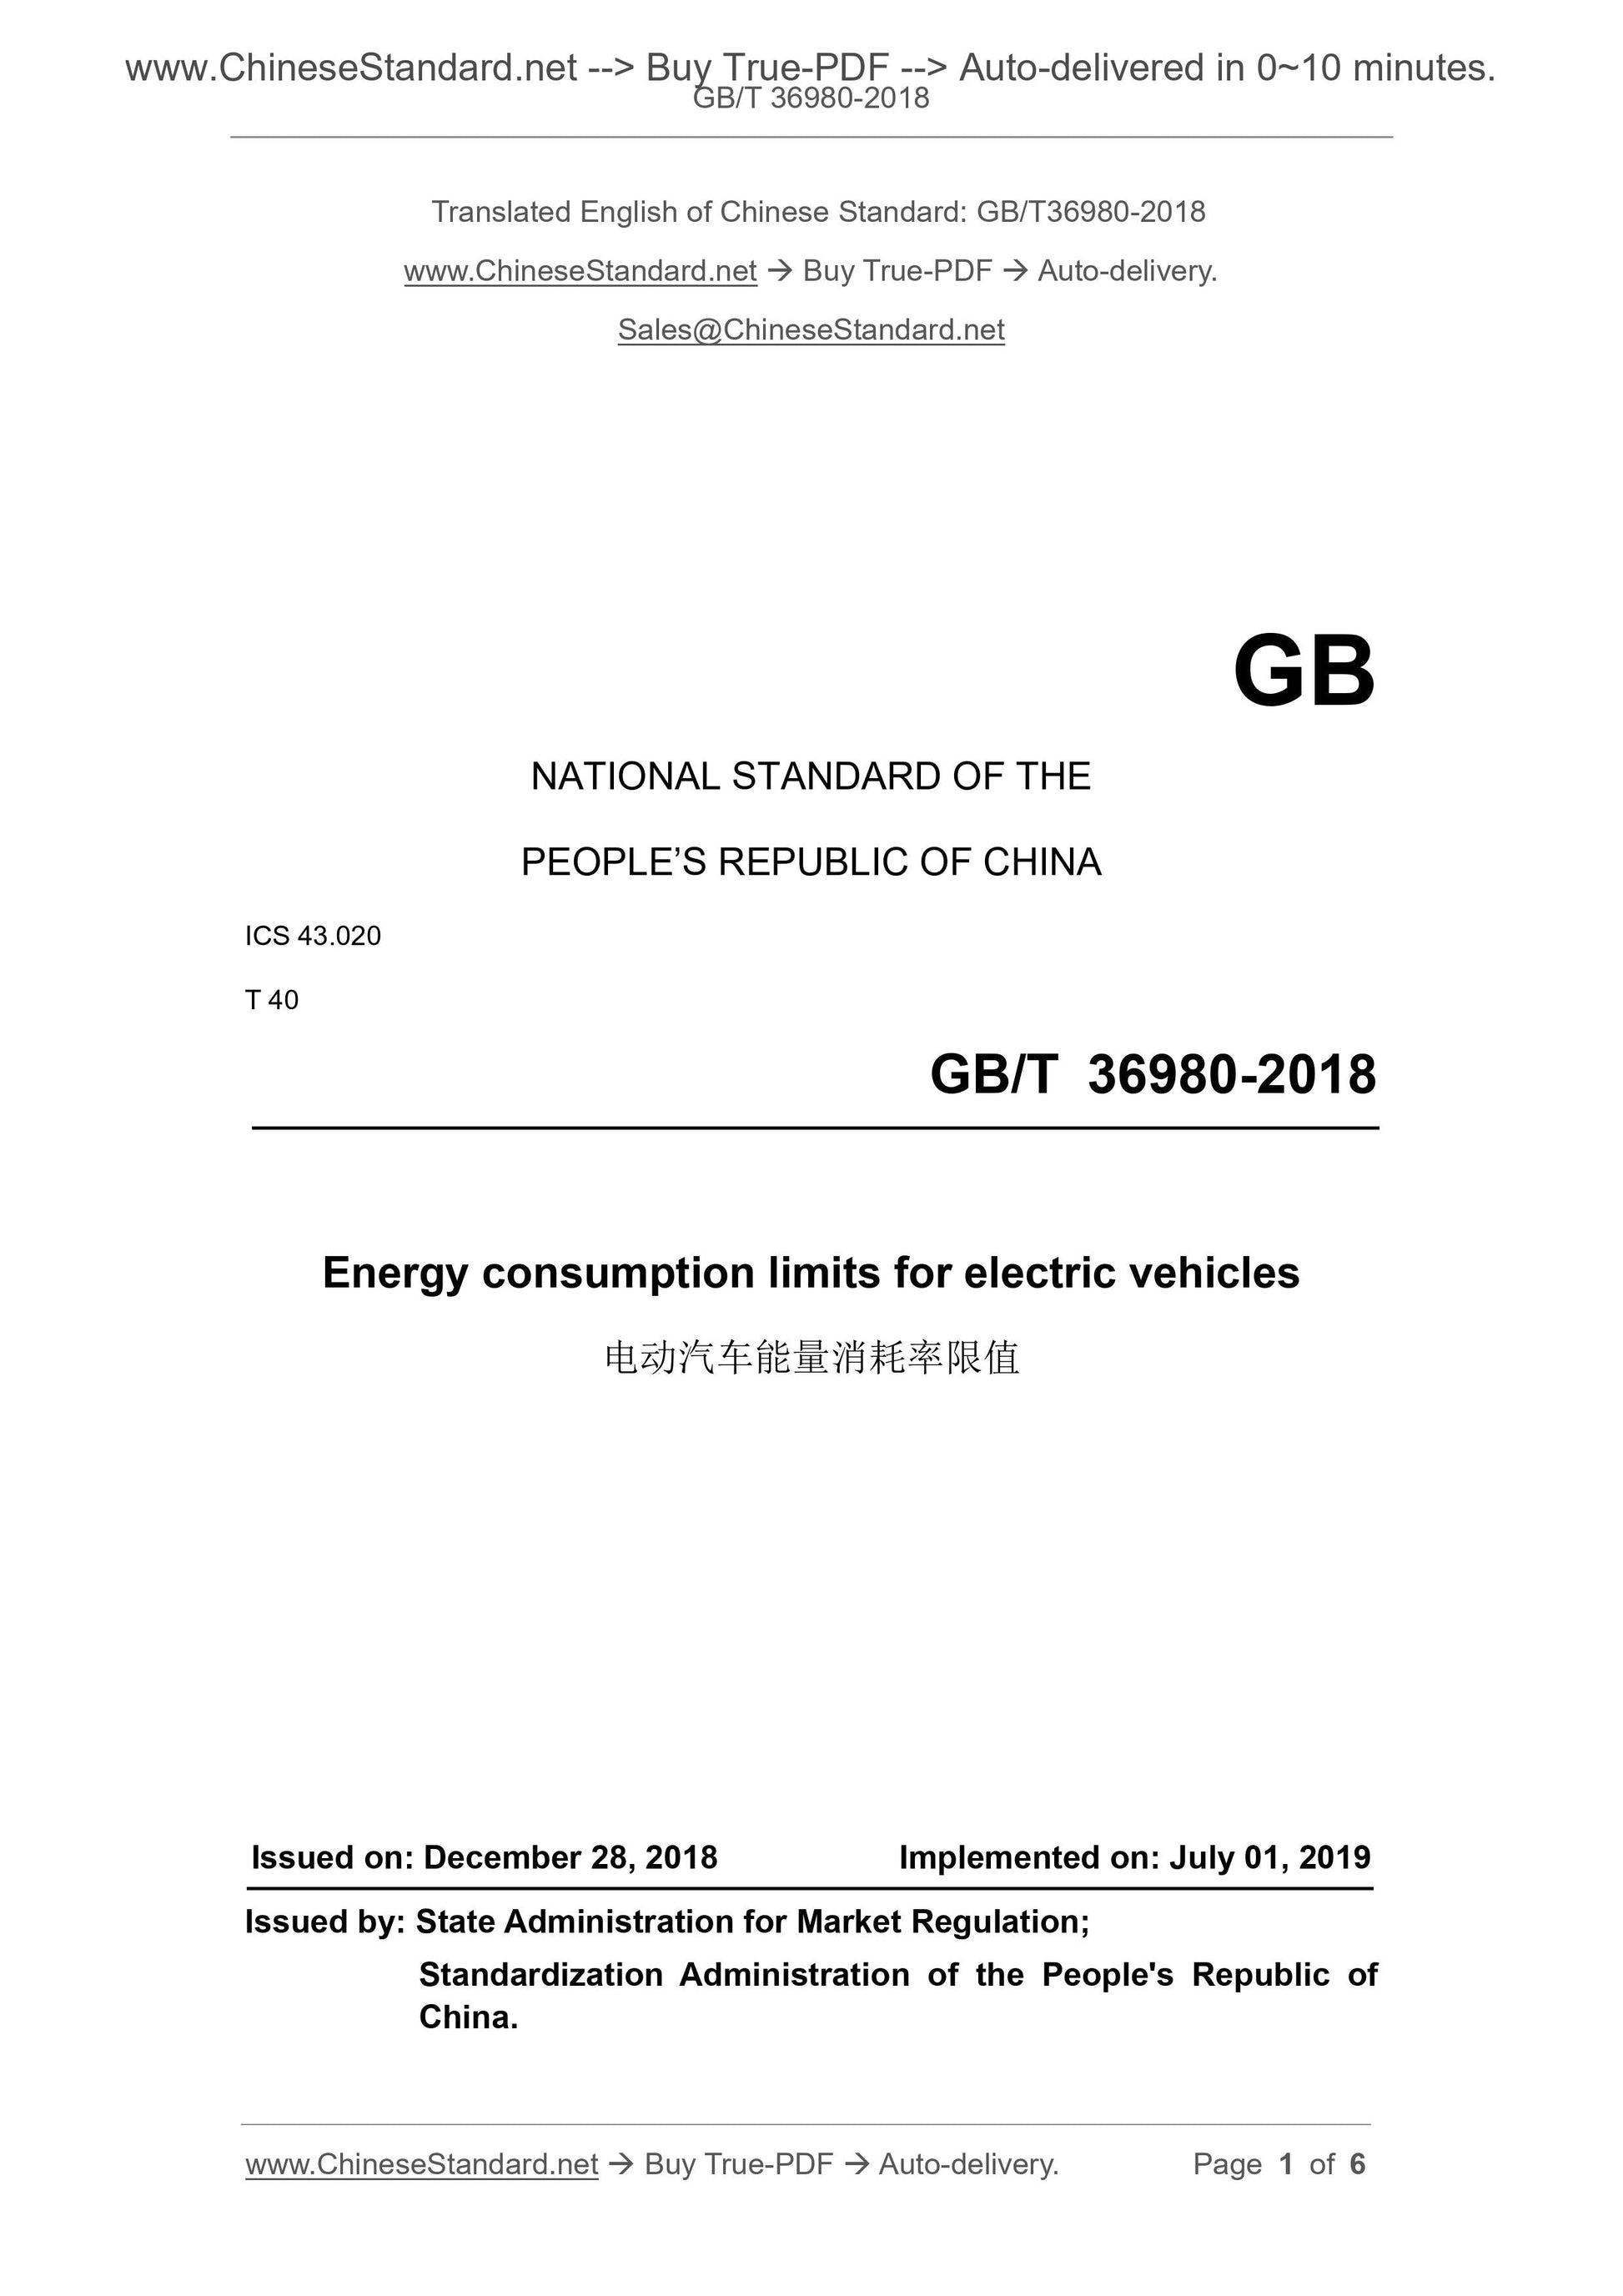 GB/T 36980-2018 Page 1